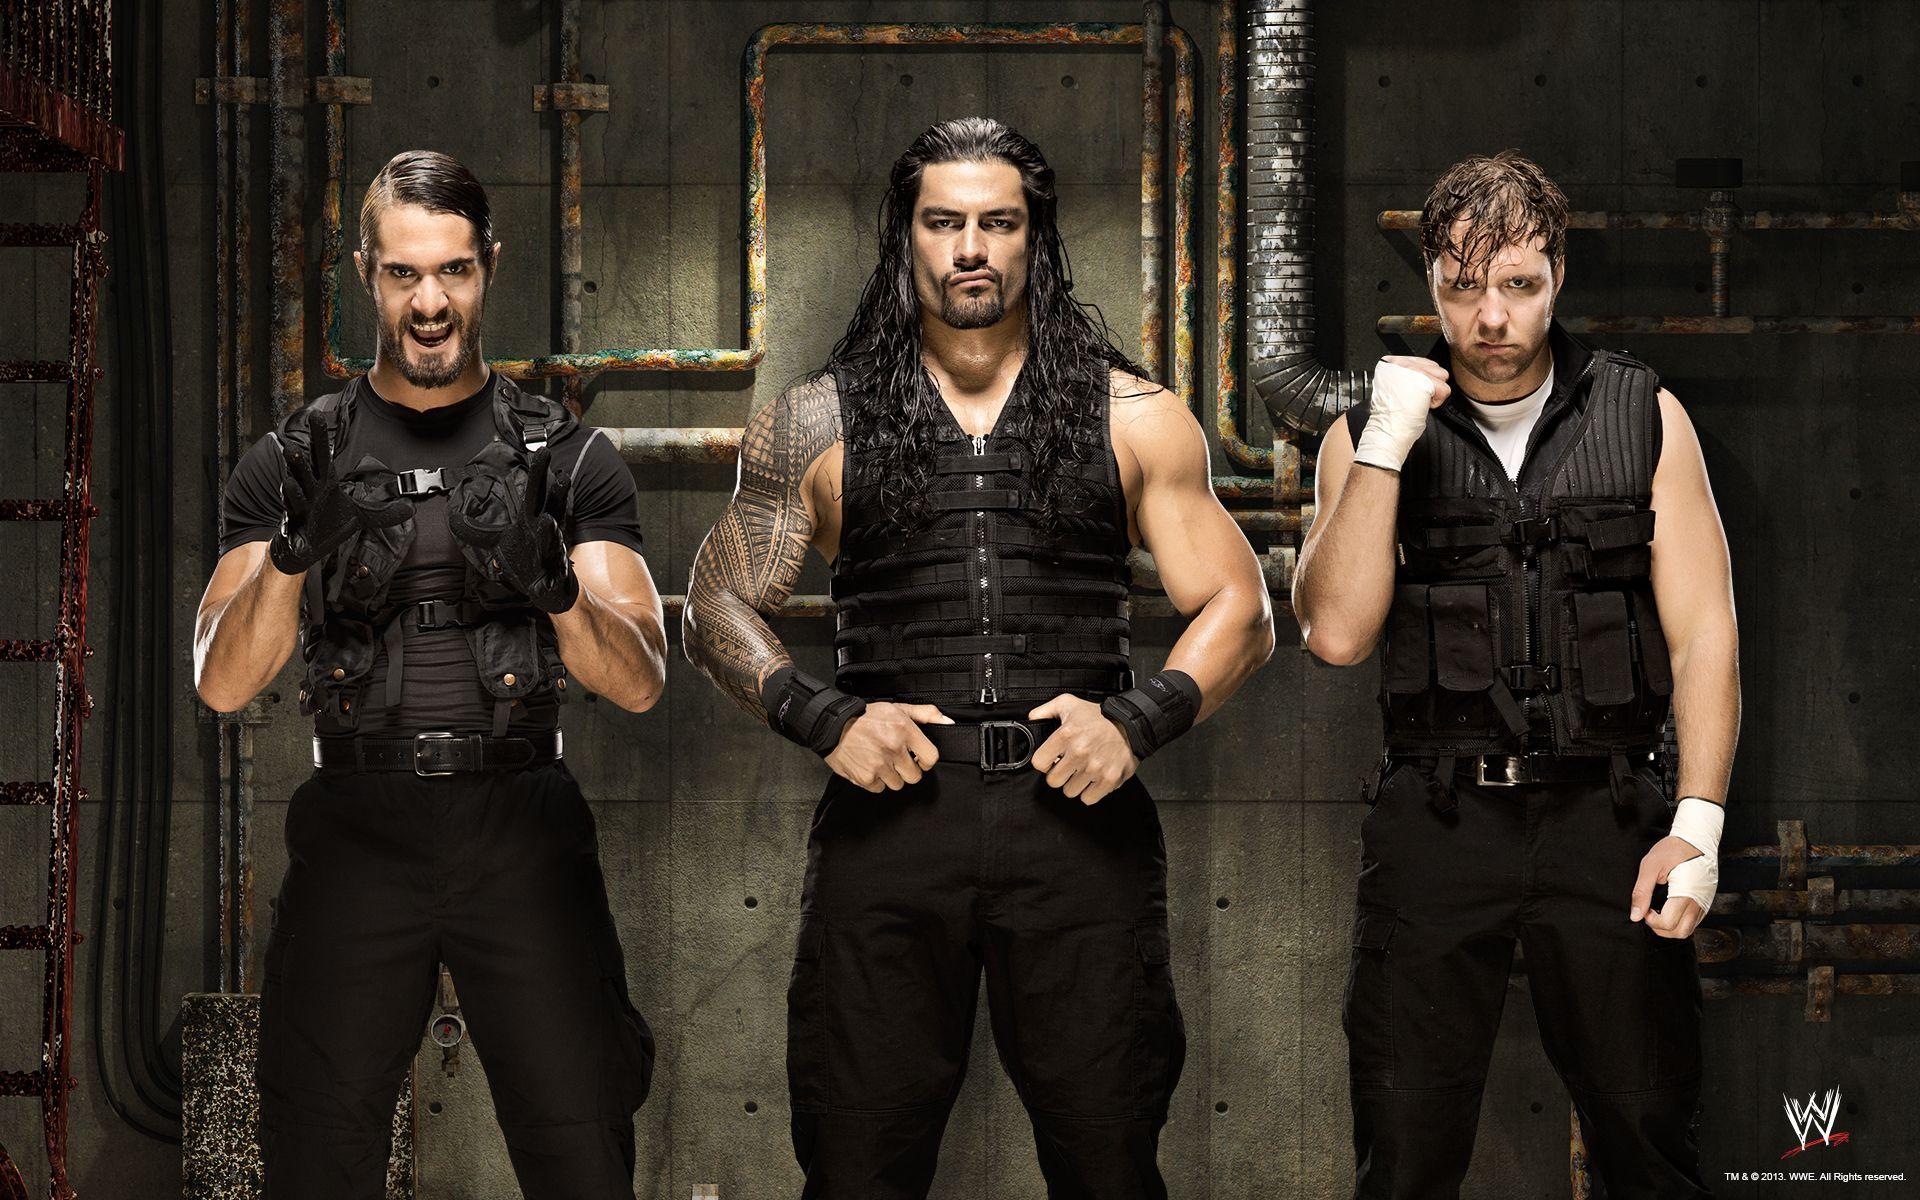 about wwe image WWE'S hound of justice HD wallpaper and background